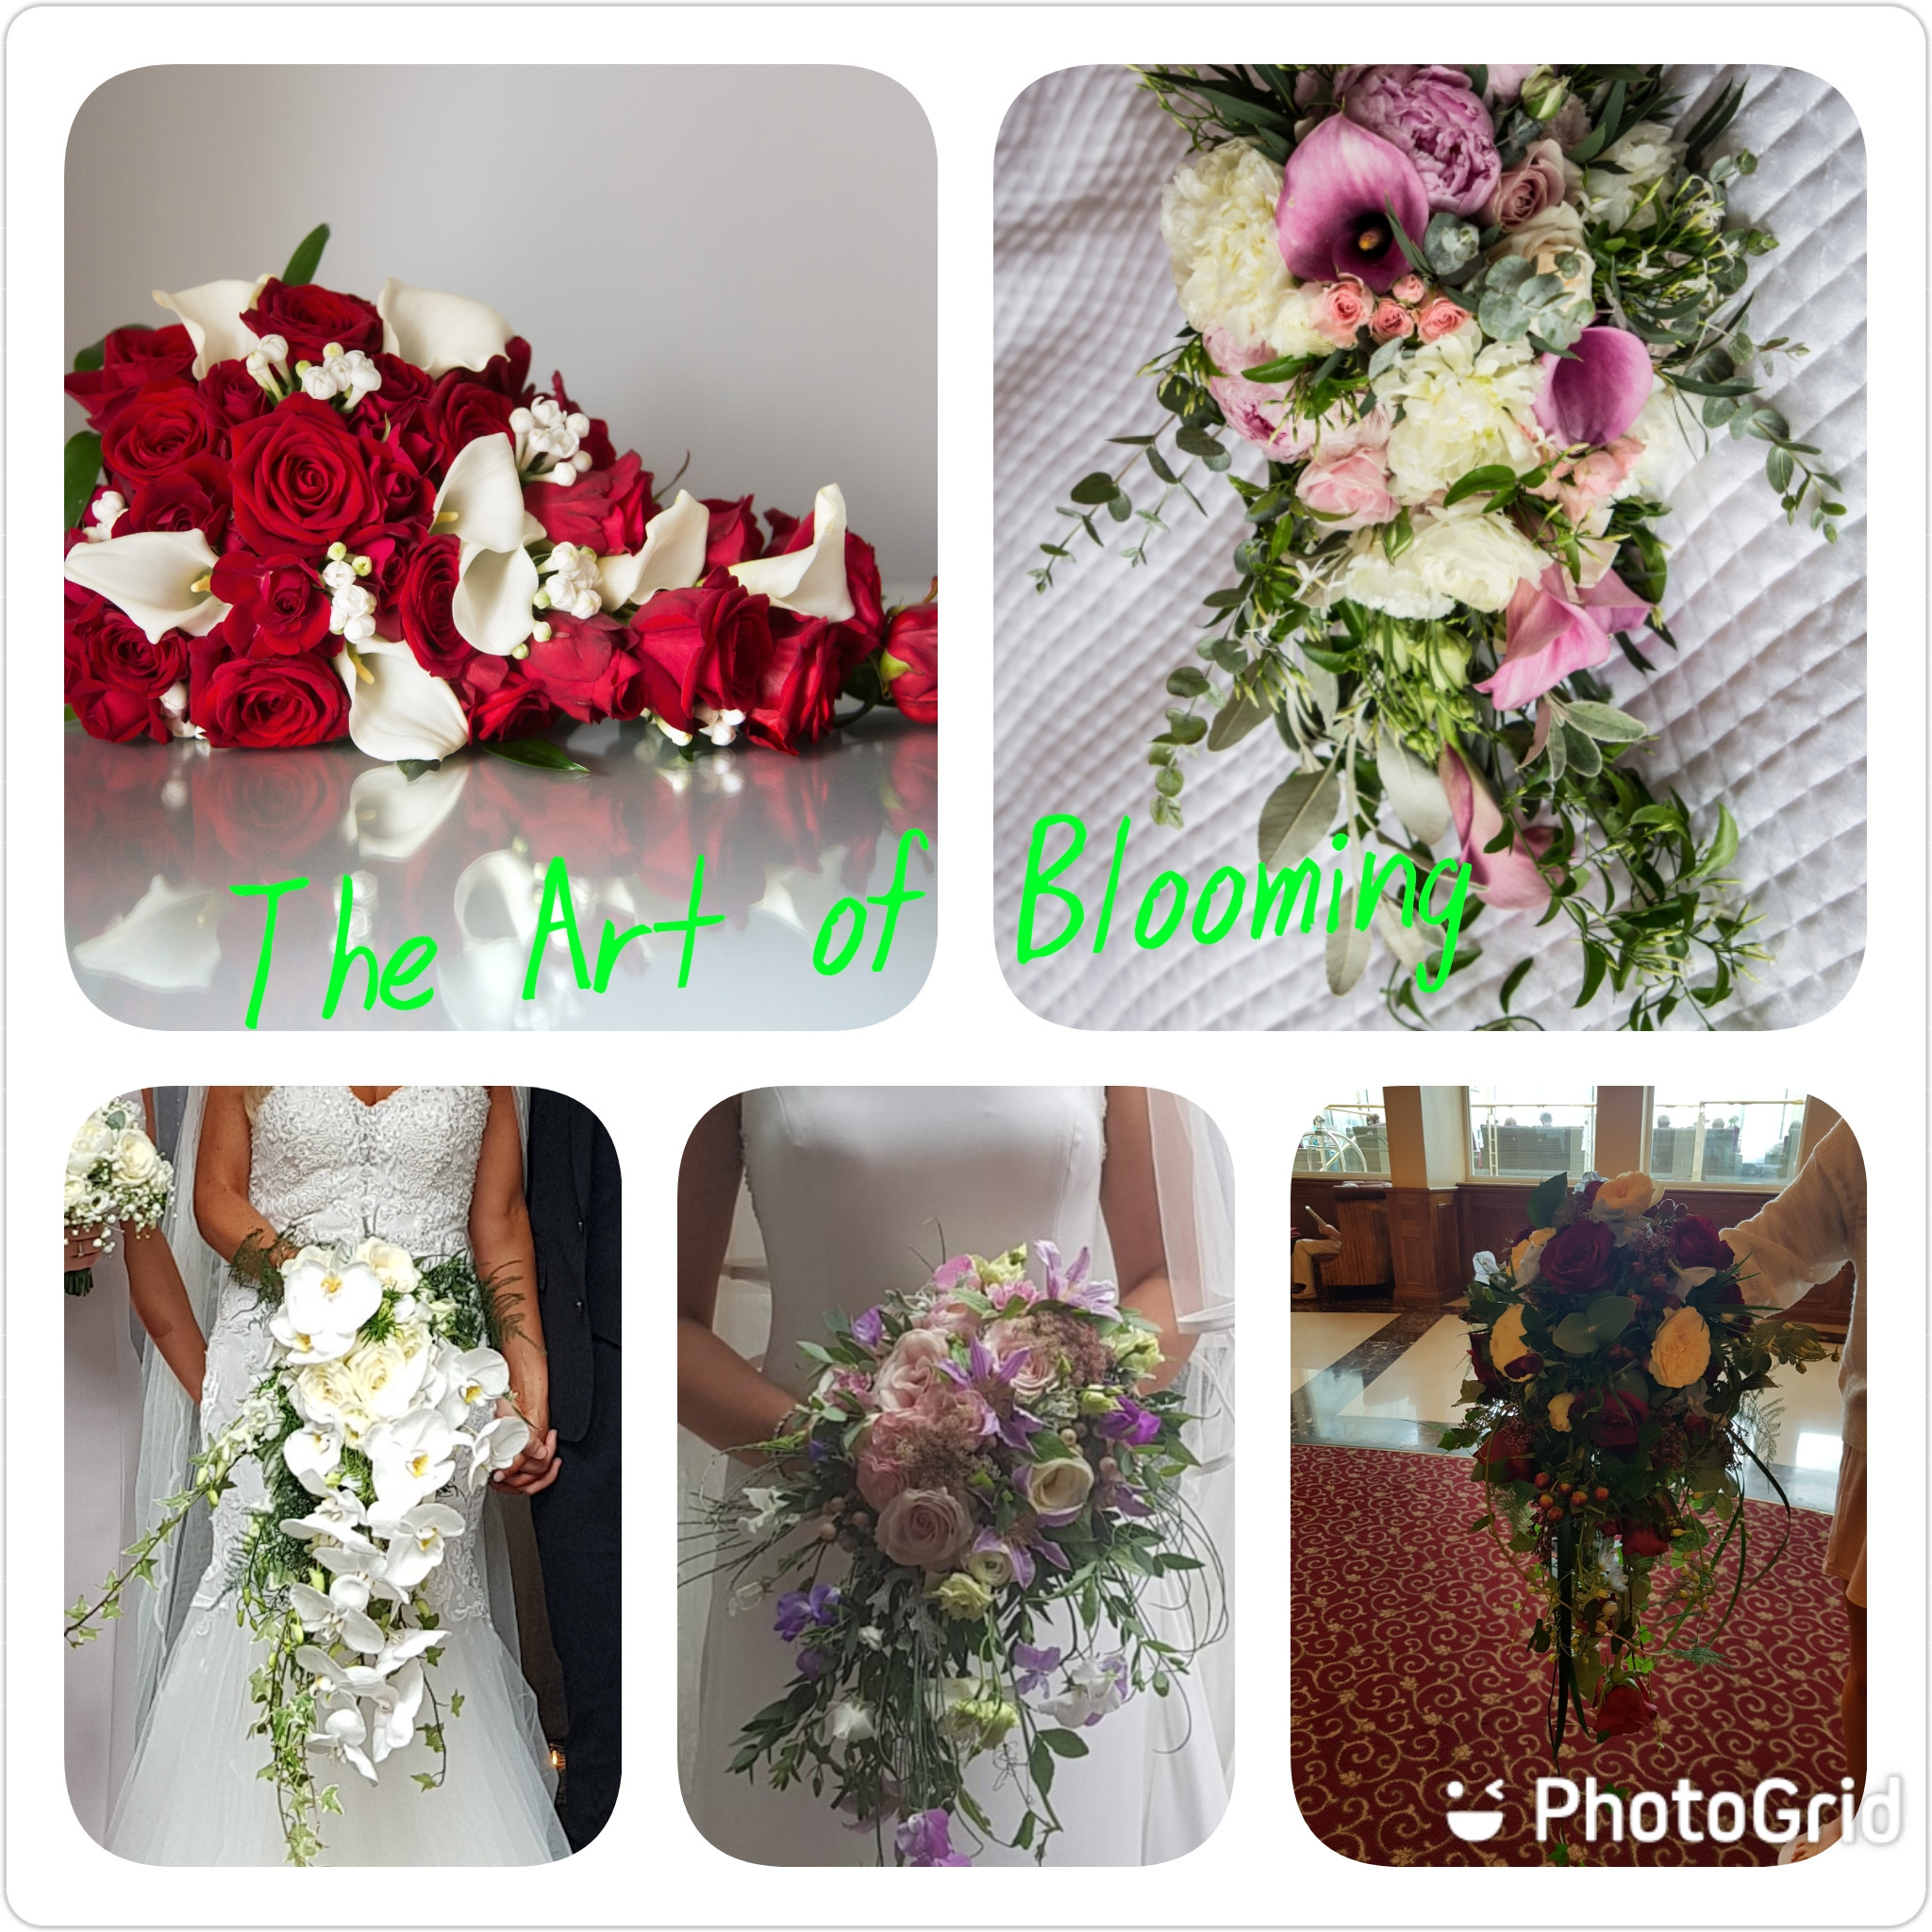 The Art of Blooming